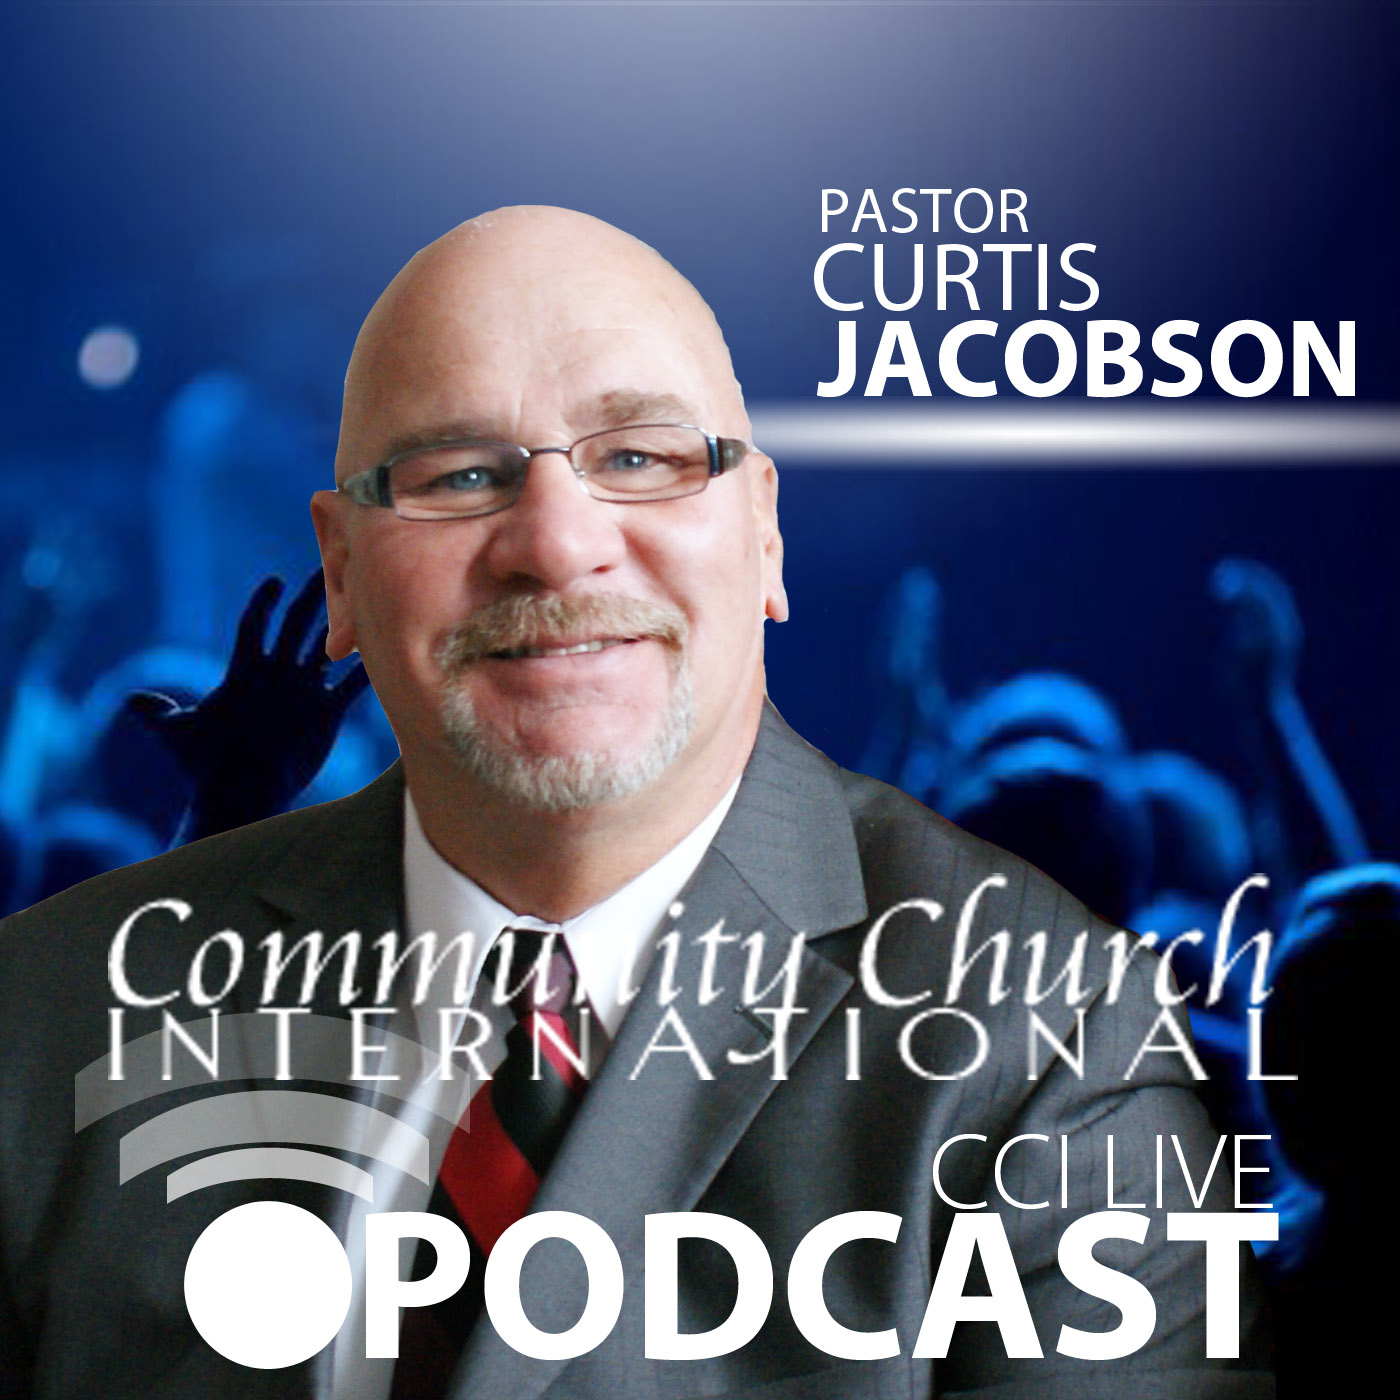 Where Am I Going? - Pastor Curtis Jacobson